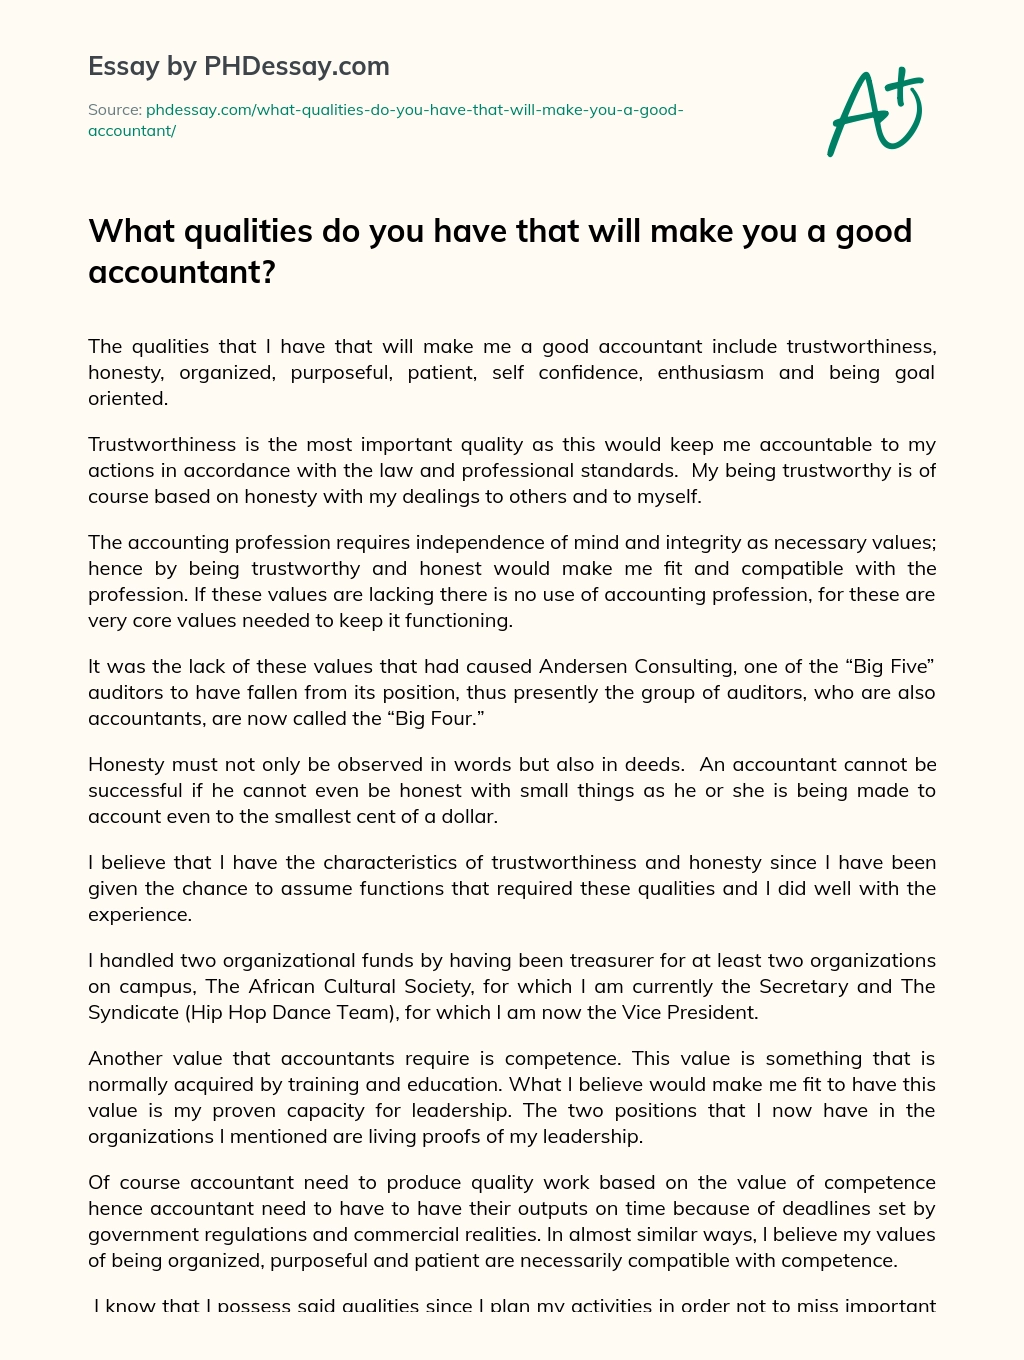 What qualities do you have that will make you a good accountant? essay